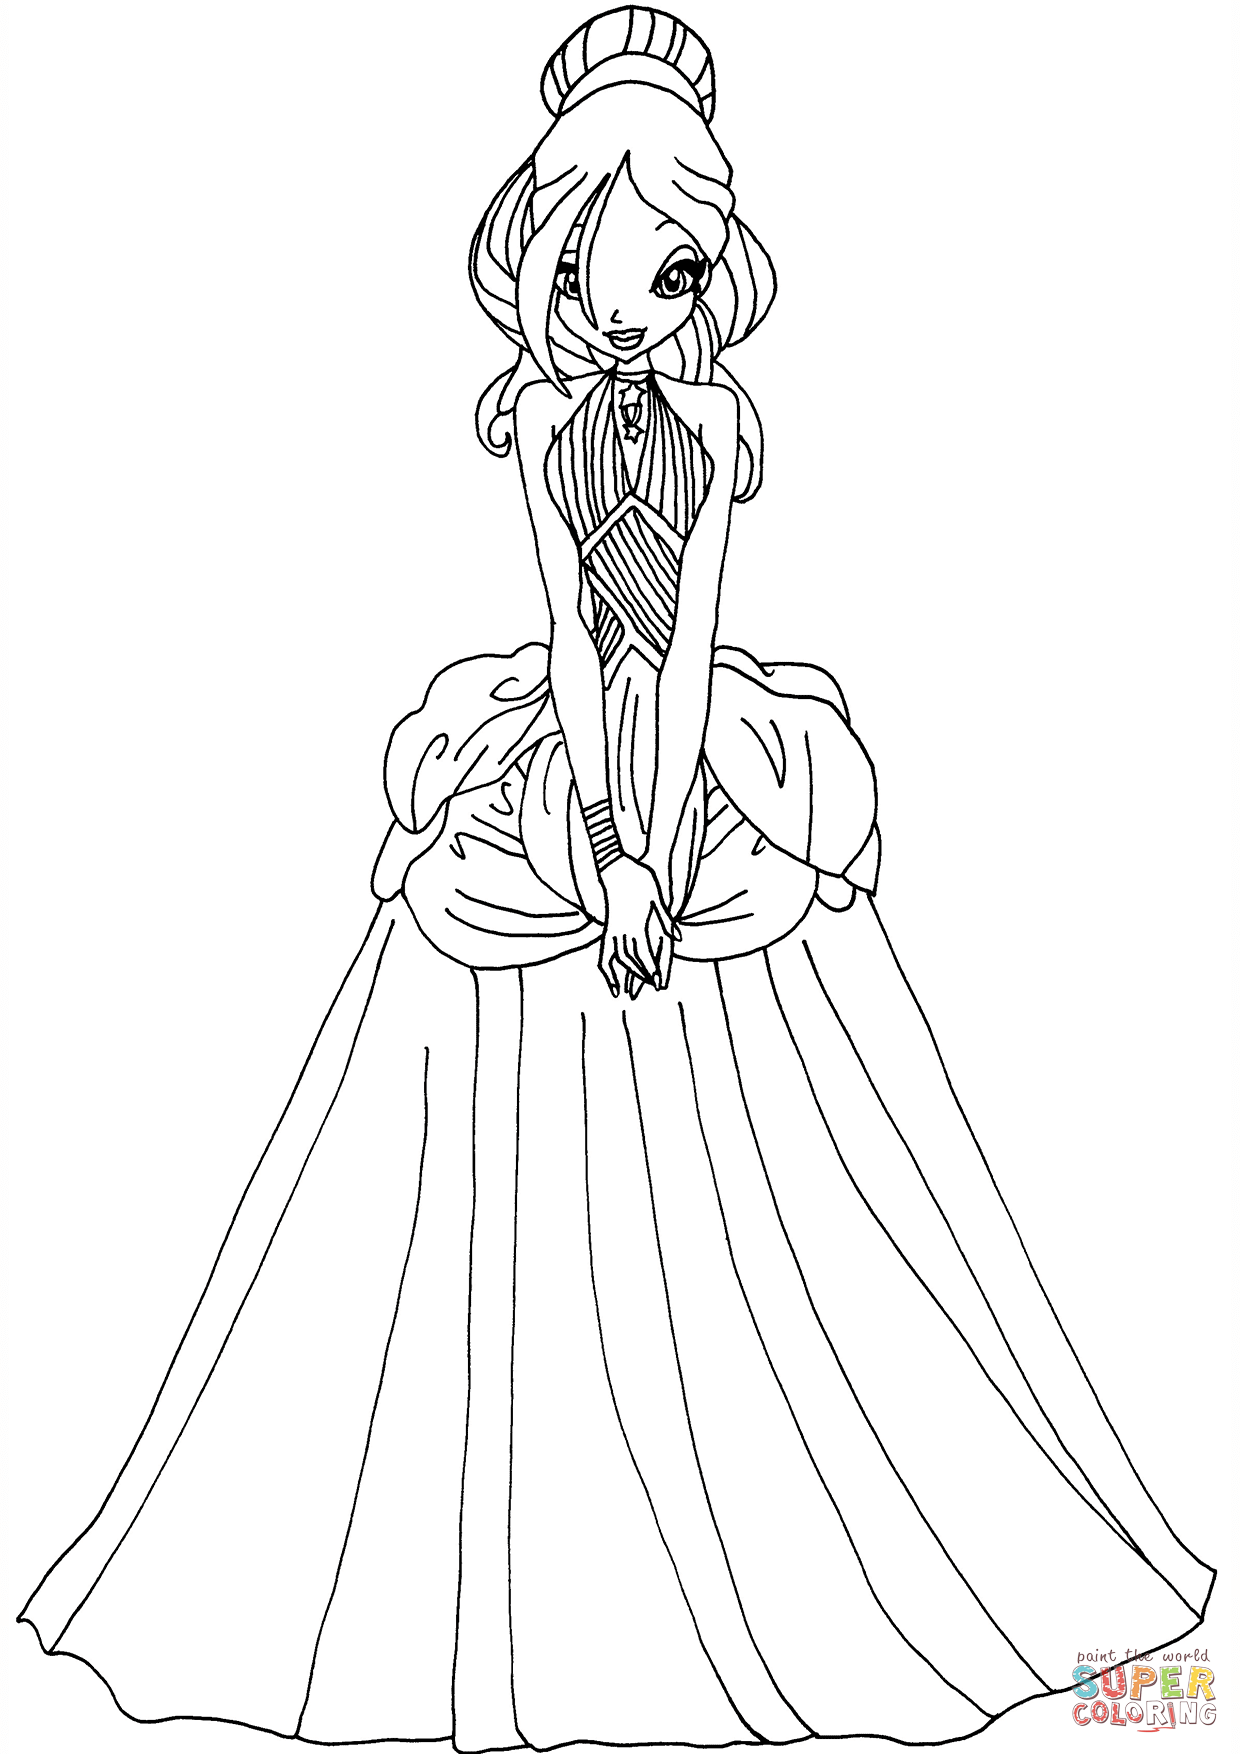 Printable Dresses Coloring Pages - Printable World Holiday